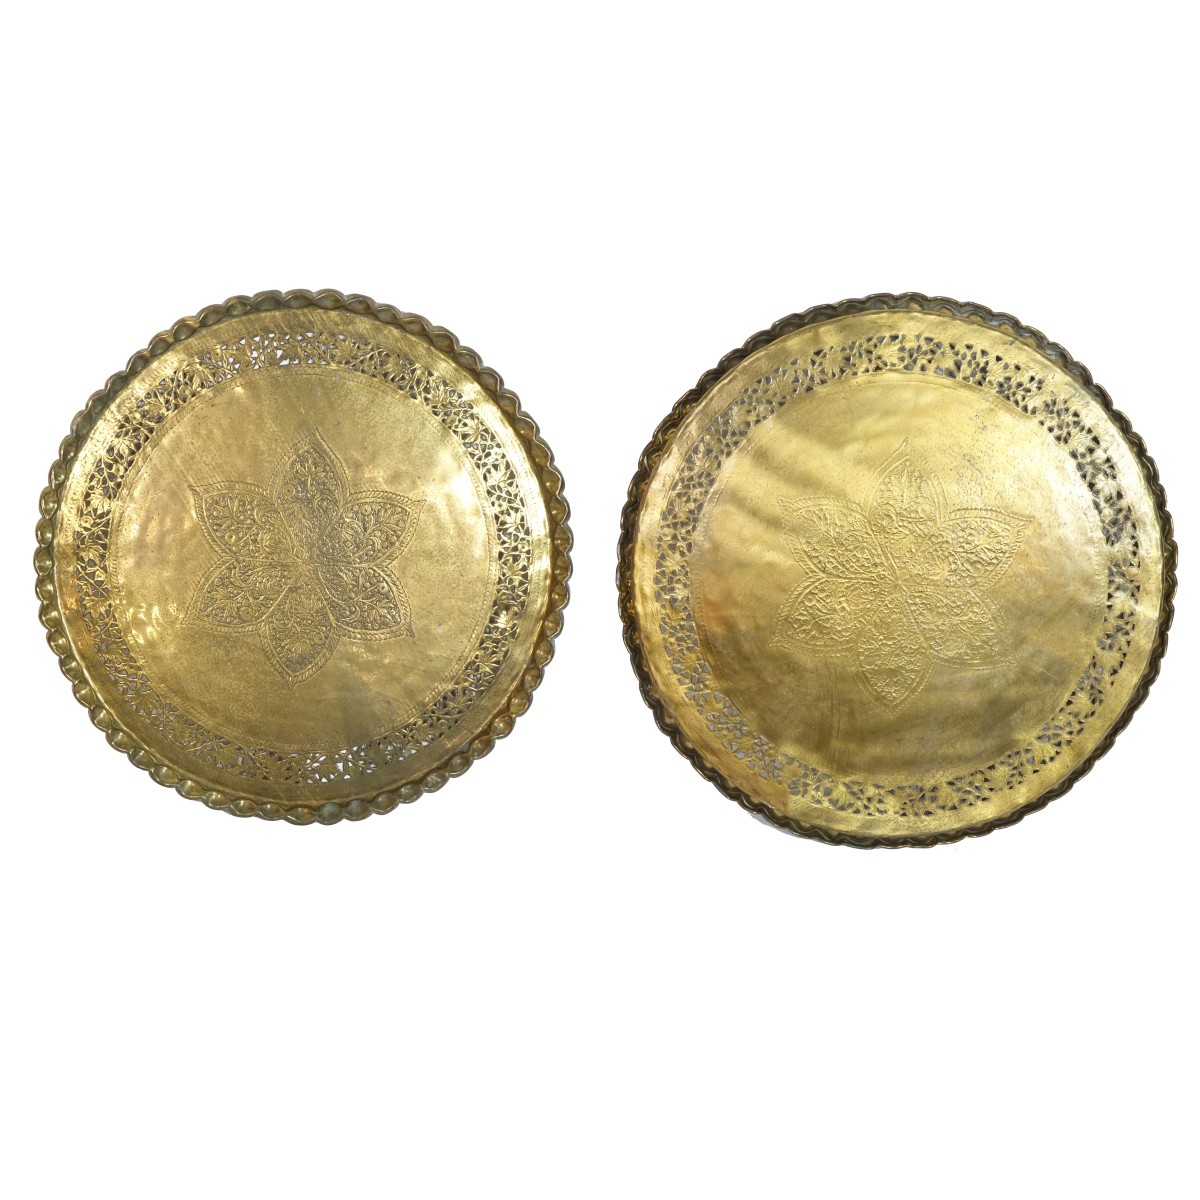 Two (2) Large Middle Eastern Brass Trays